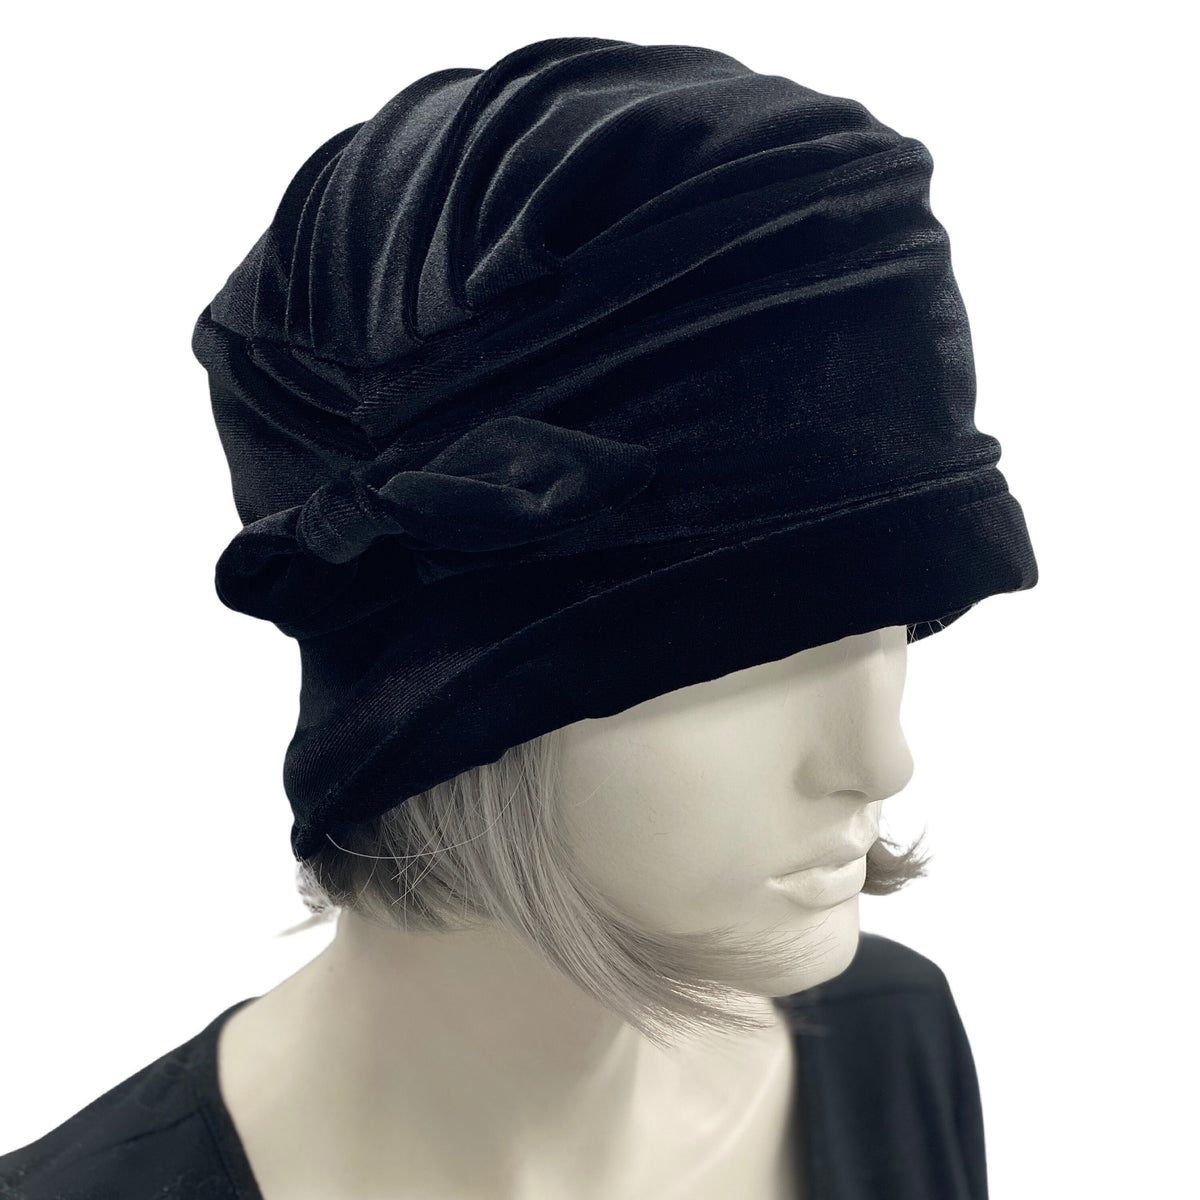 Black Velvet Cloche Hat with Cute Bow and Small Brim | The Alice